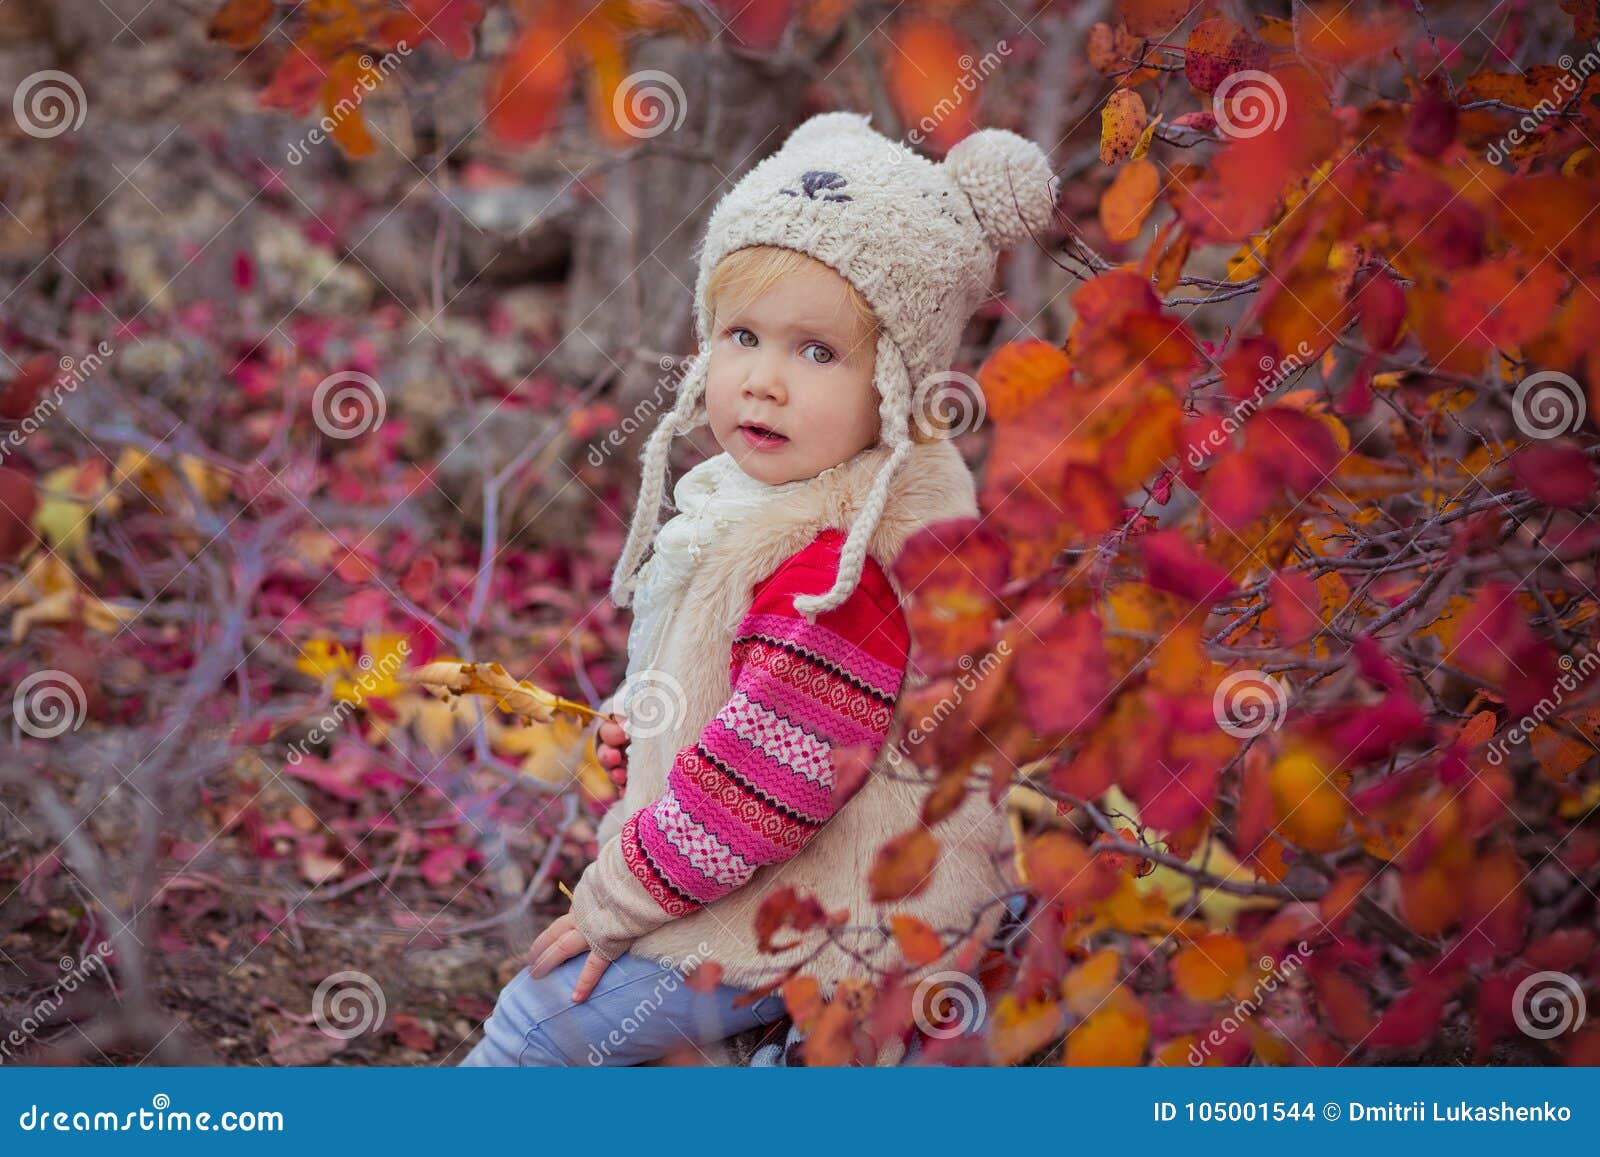 cute young russian baby girl stylish dressed in warm white fur handmade jacket blue jeans boots and hooked hat teddy bear posing i